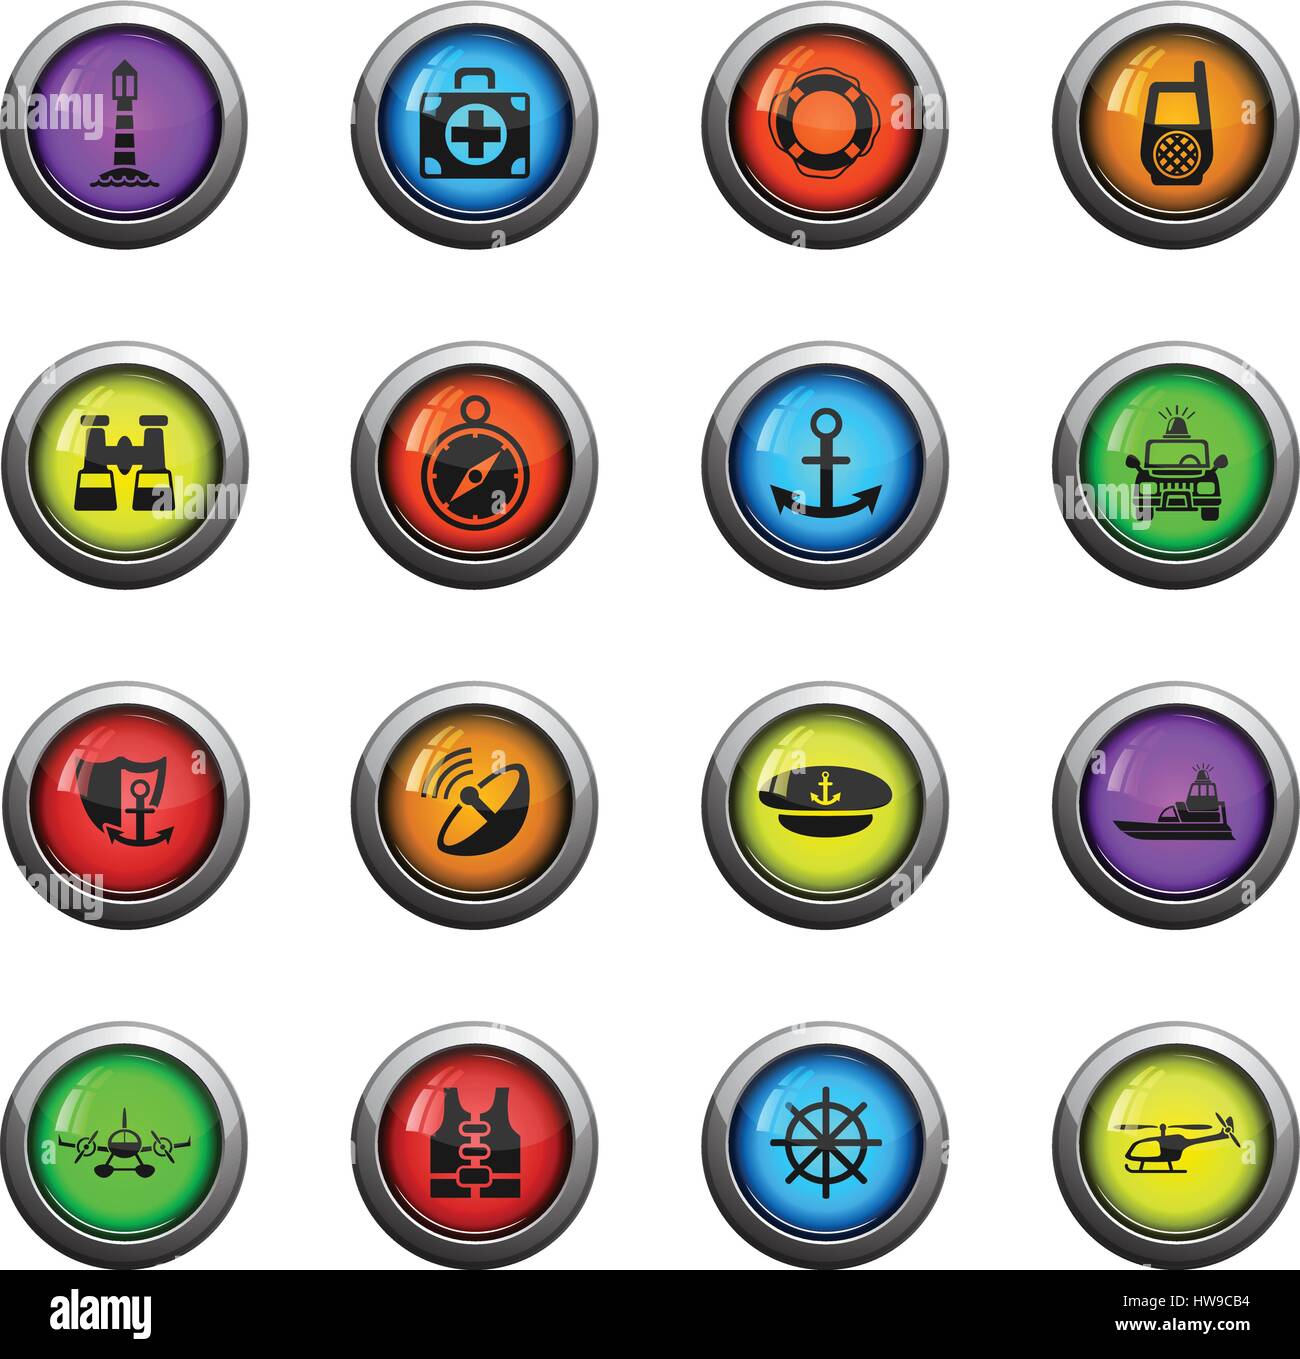 coastguard icons on color round glass buttons for your design Stock Vector